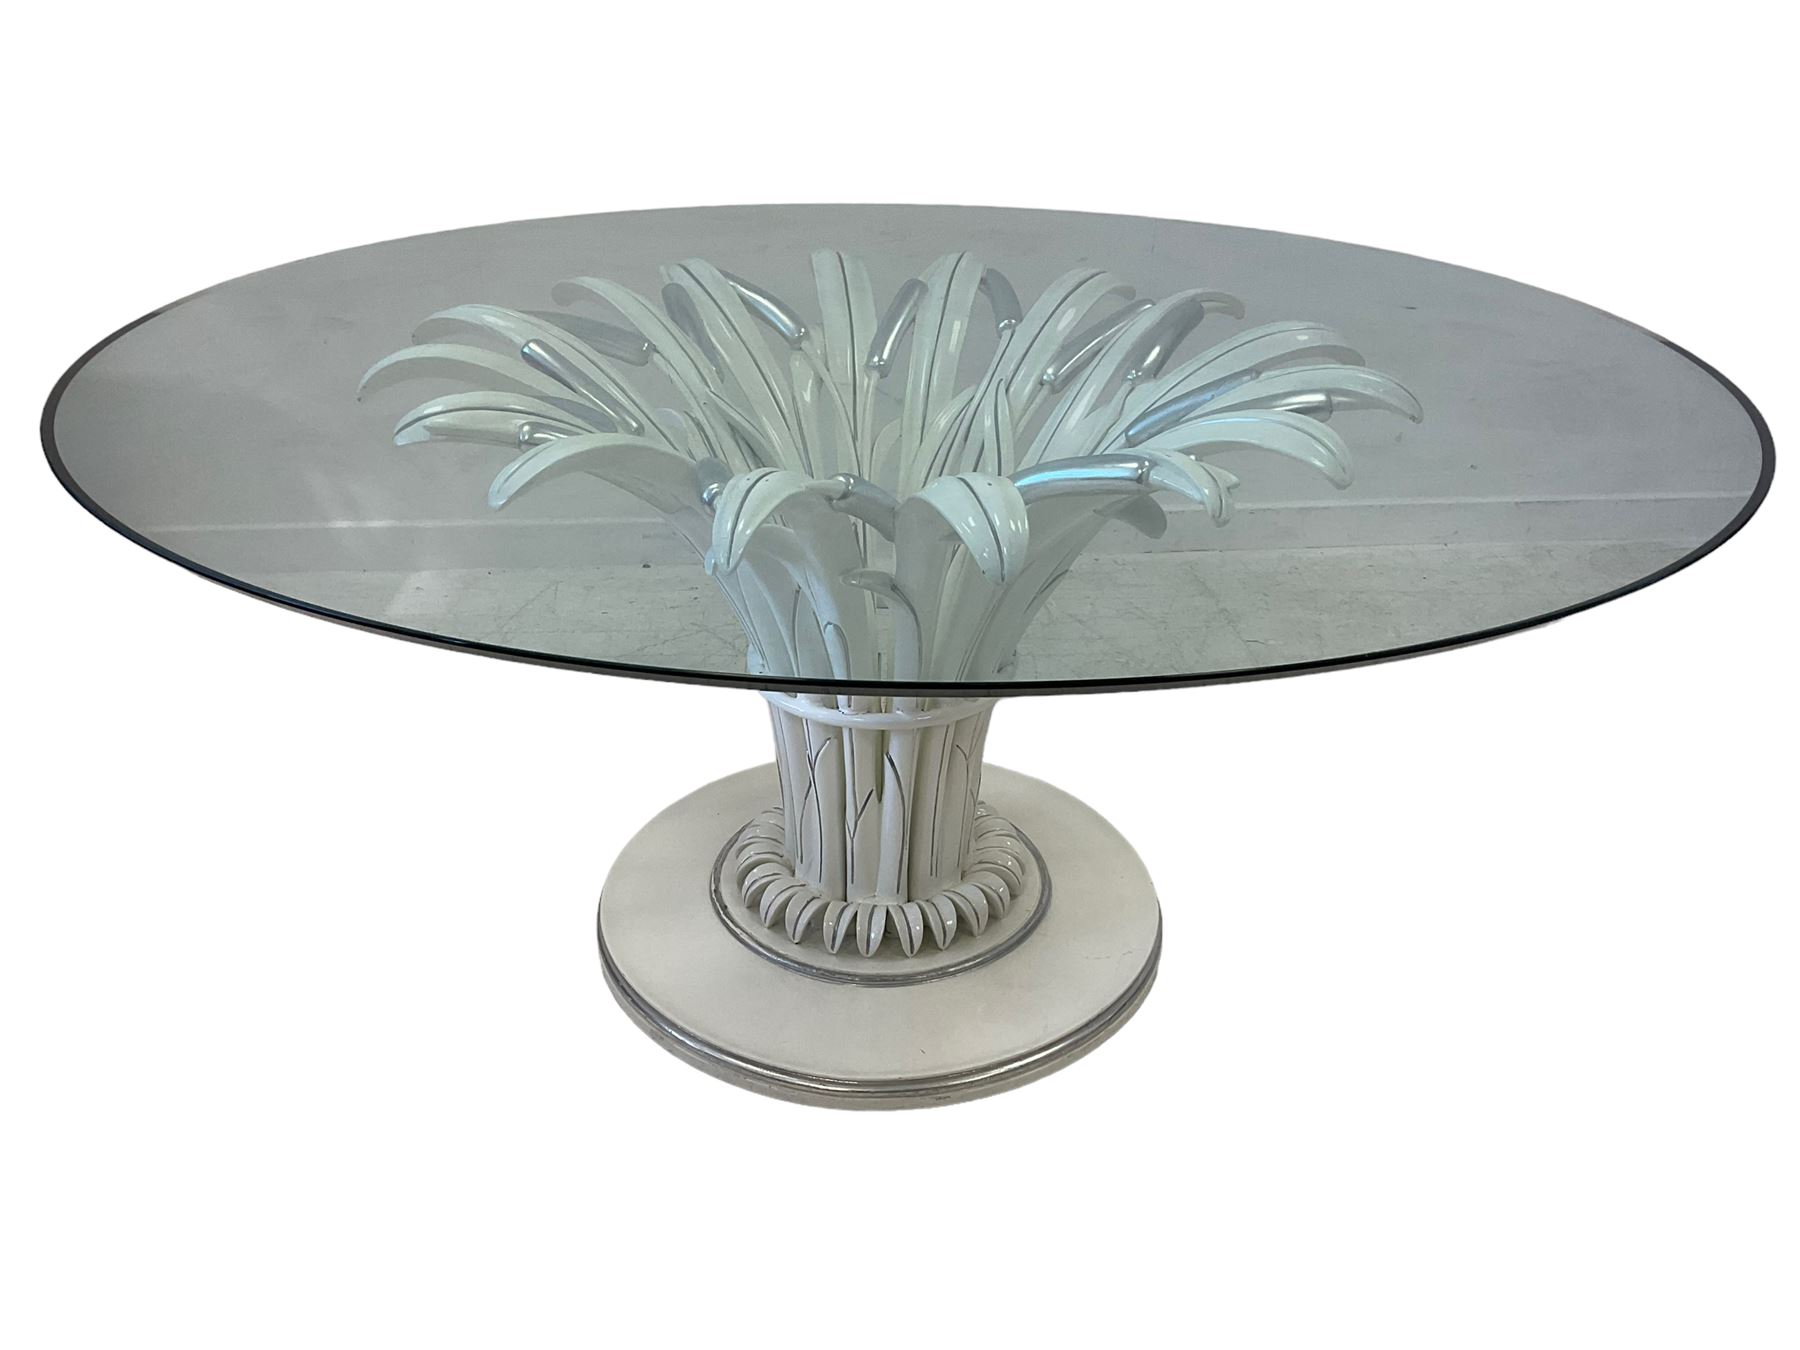 Contemporary Italian designer centre or dining table - Image 3 of 5